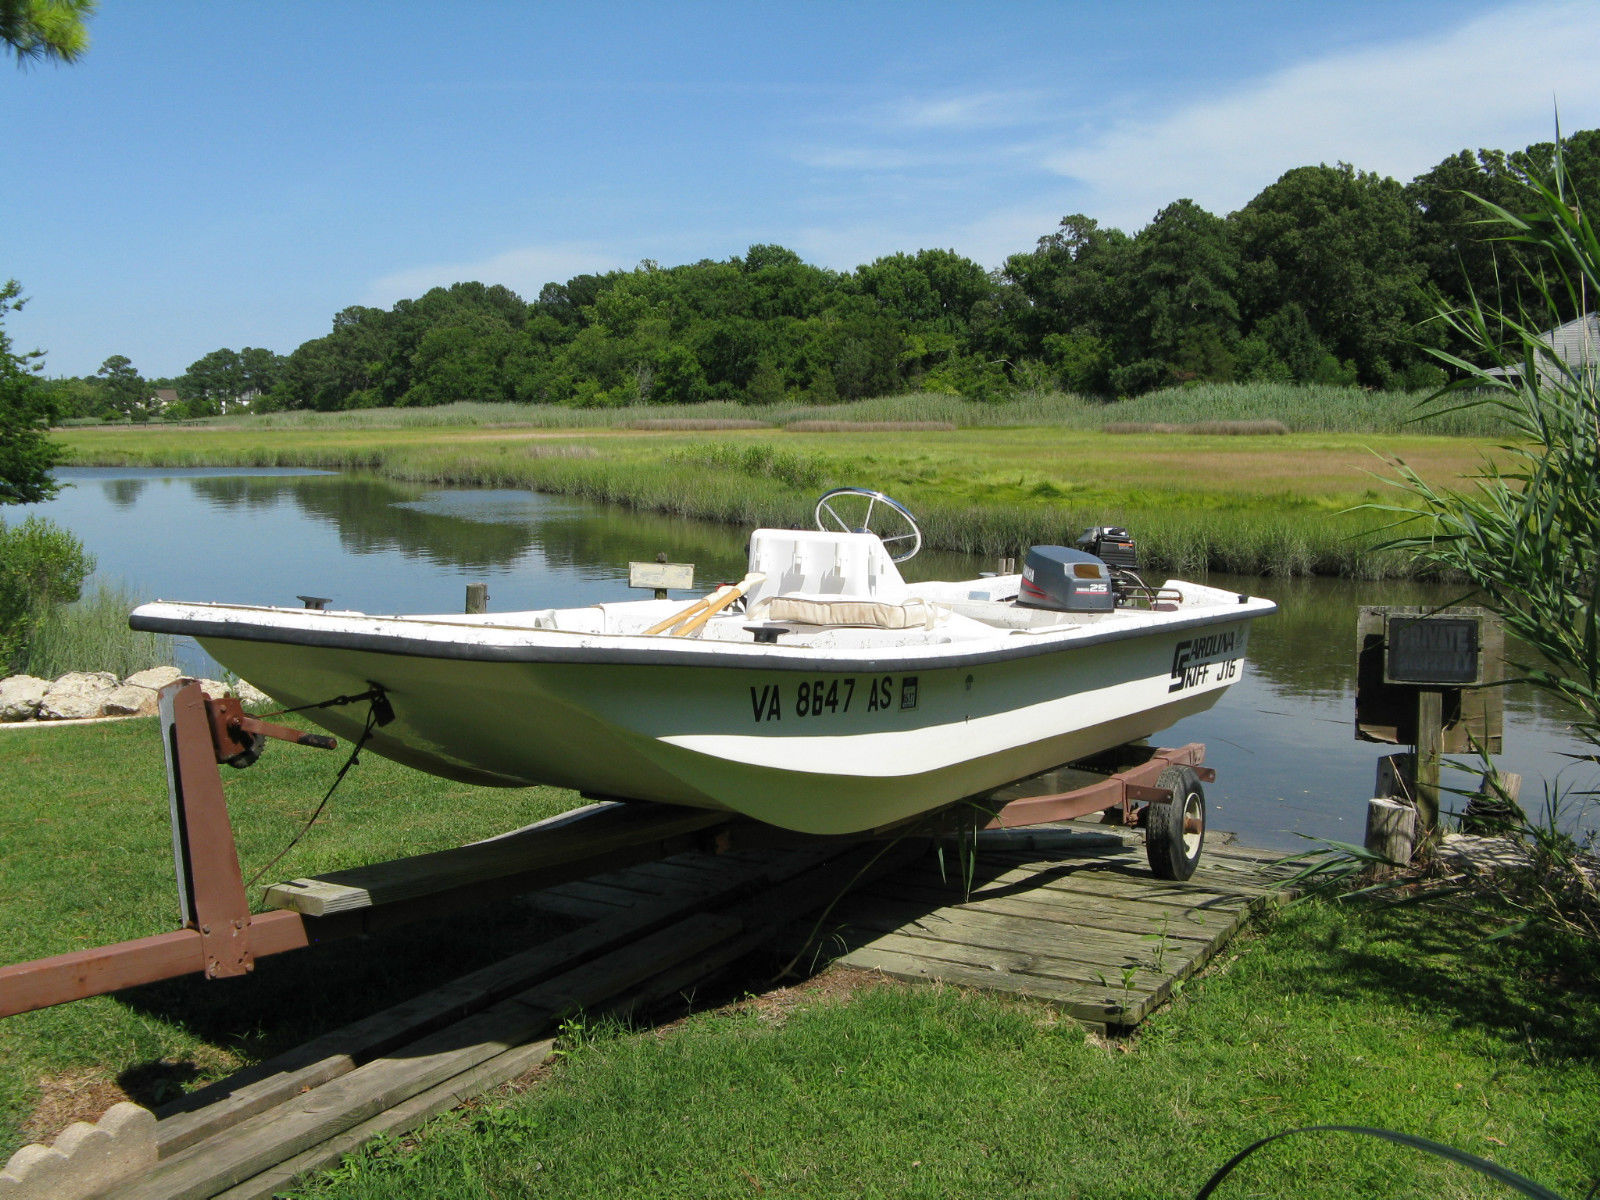 Carolina Skiff J16 1998 for sale for $3,160 - Boats-from ...